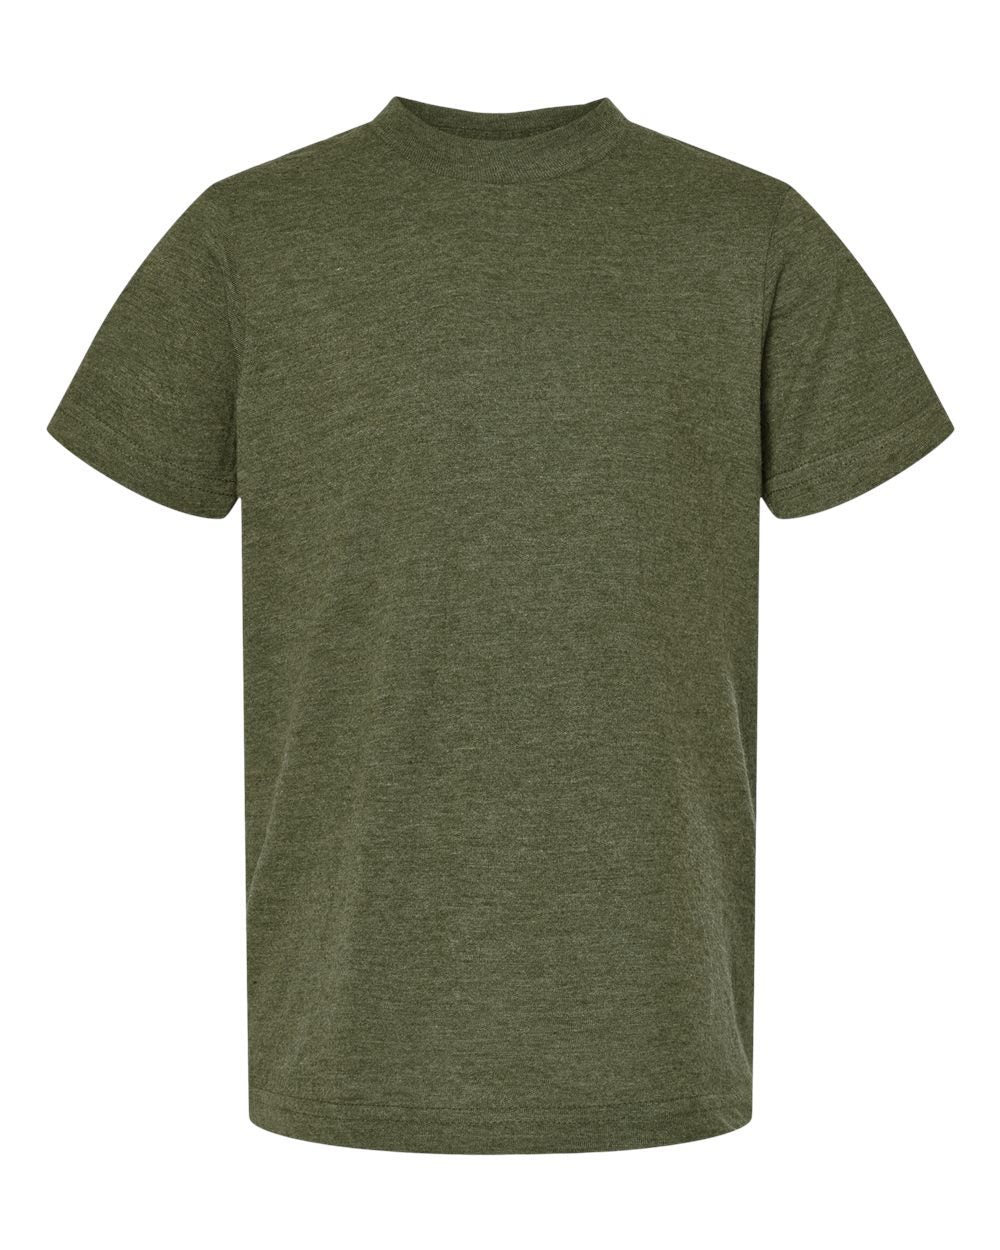 Tultex Youth Tee (235) in Heather Military Green